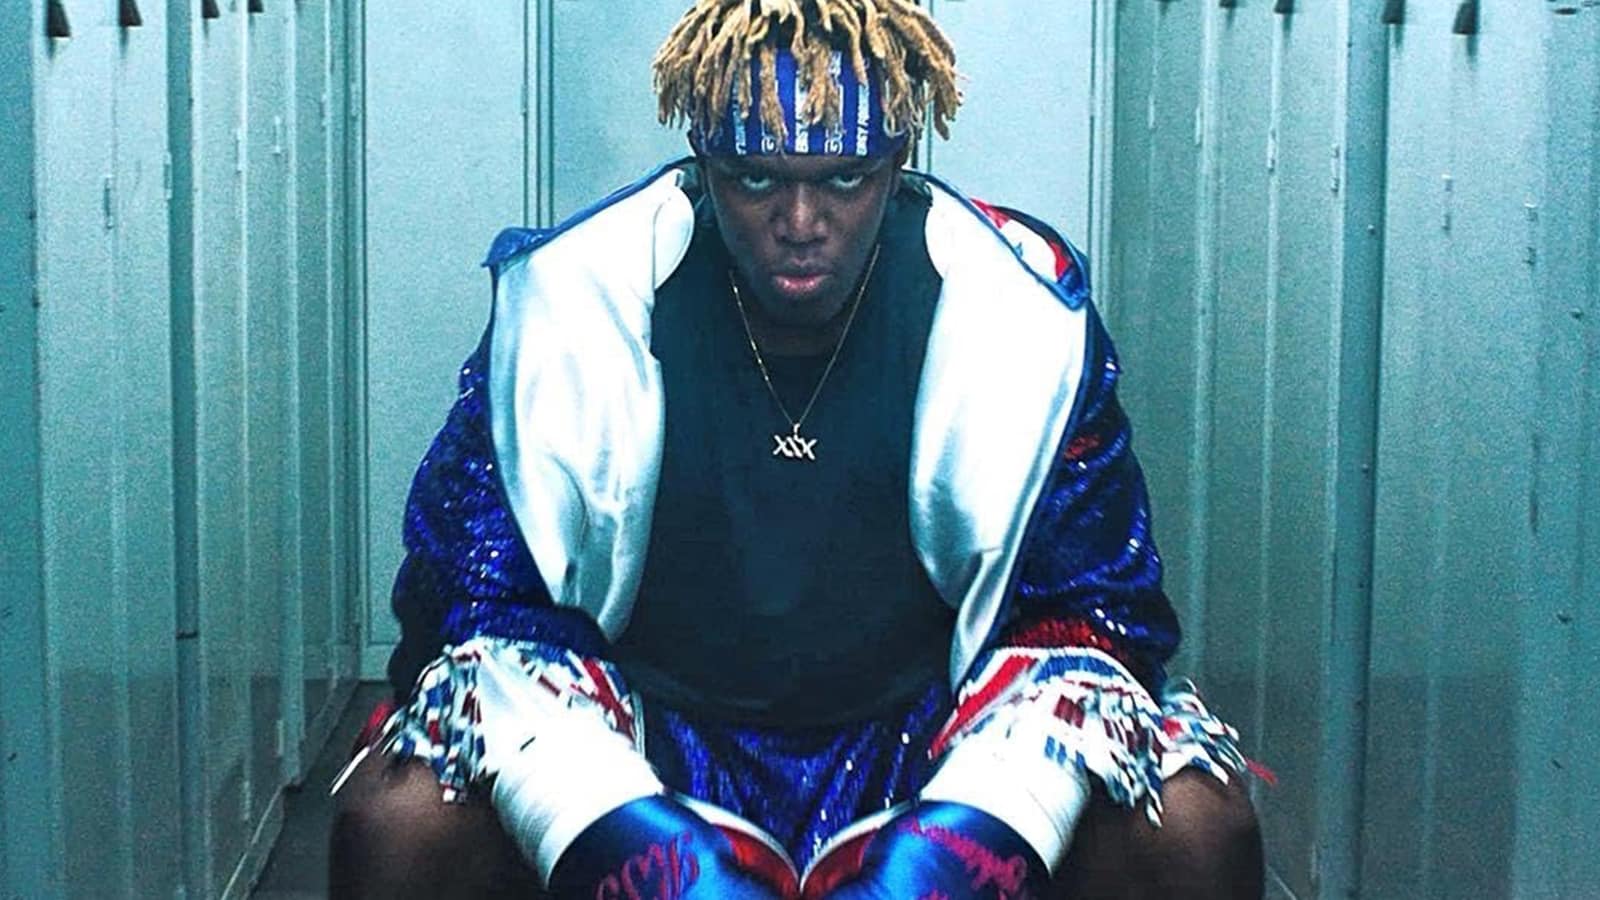 Ksi confirms his return to boxing after a two-year hiatus